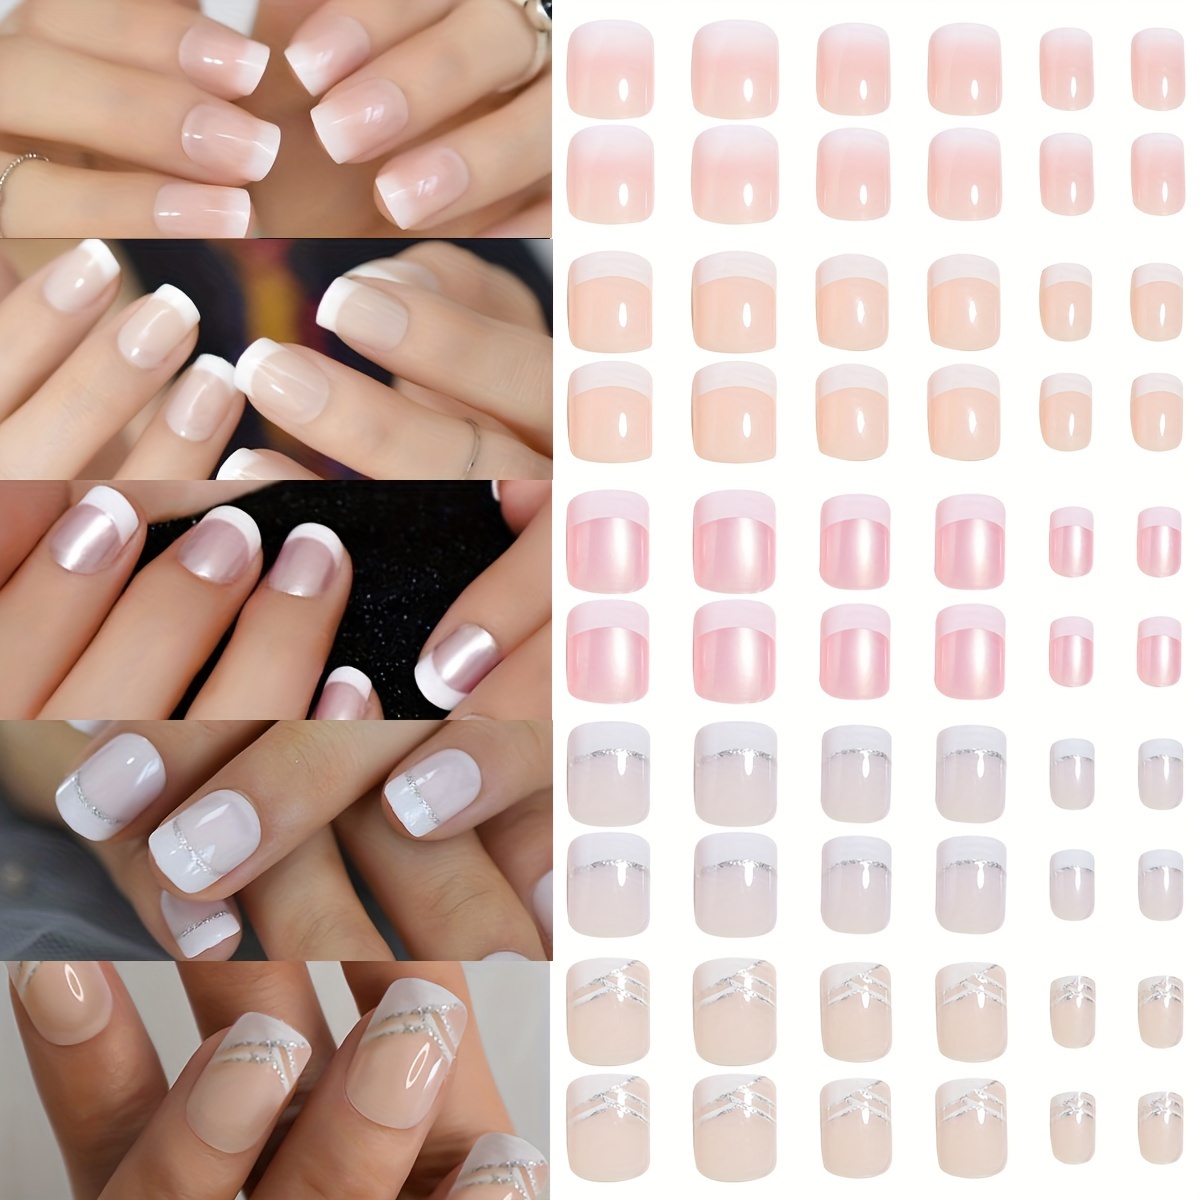 

120pc Chic French Tip Press-on Nails Set - Short Square, Glossy Finish In Pink & Nude Shades With Glitter Accents - Easy Diy Manicure Kit